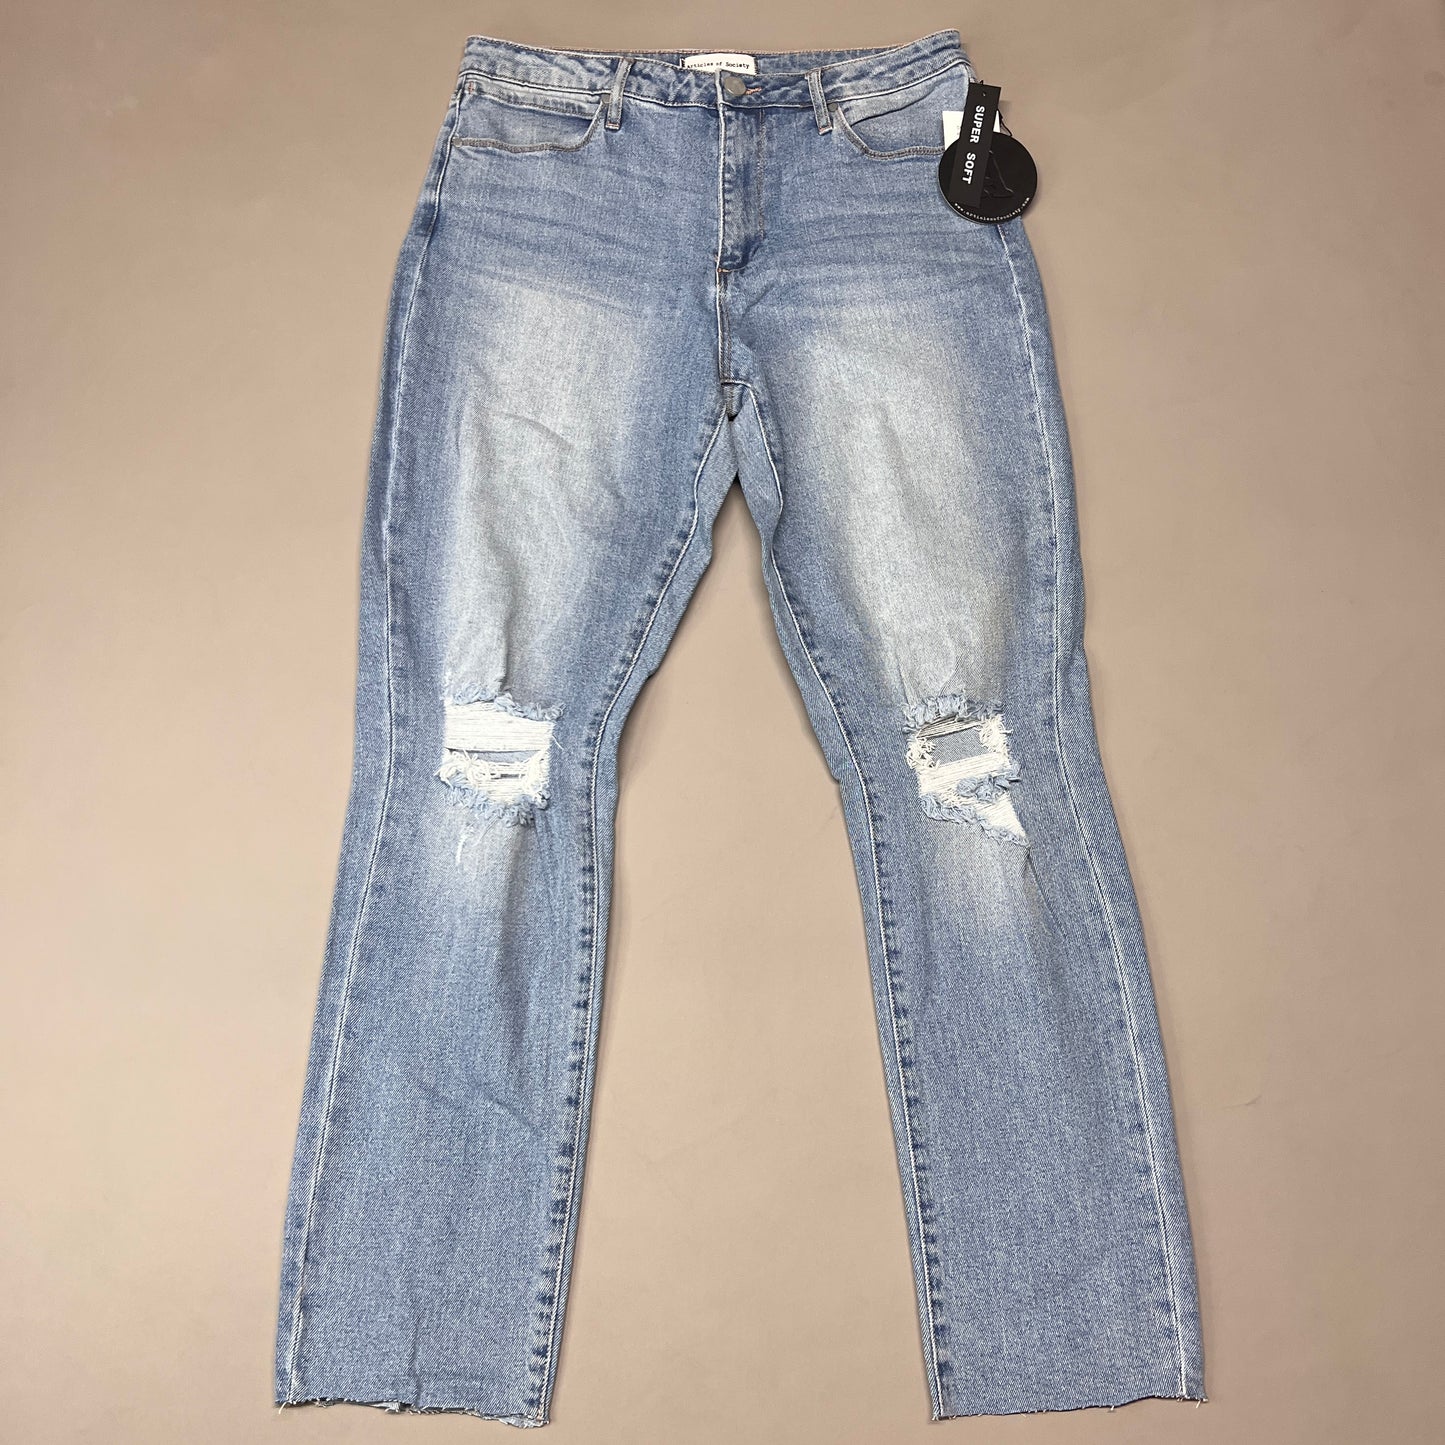 ARTICLES OF SOCIETY Orchidland Ripped Denim Jeans Women's Sz 28 Blue 4009TQ3-717 (New)